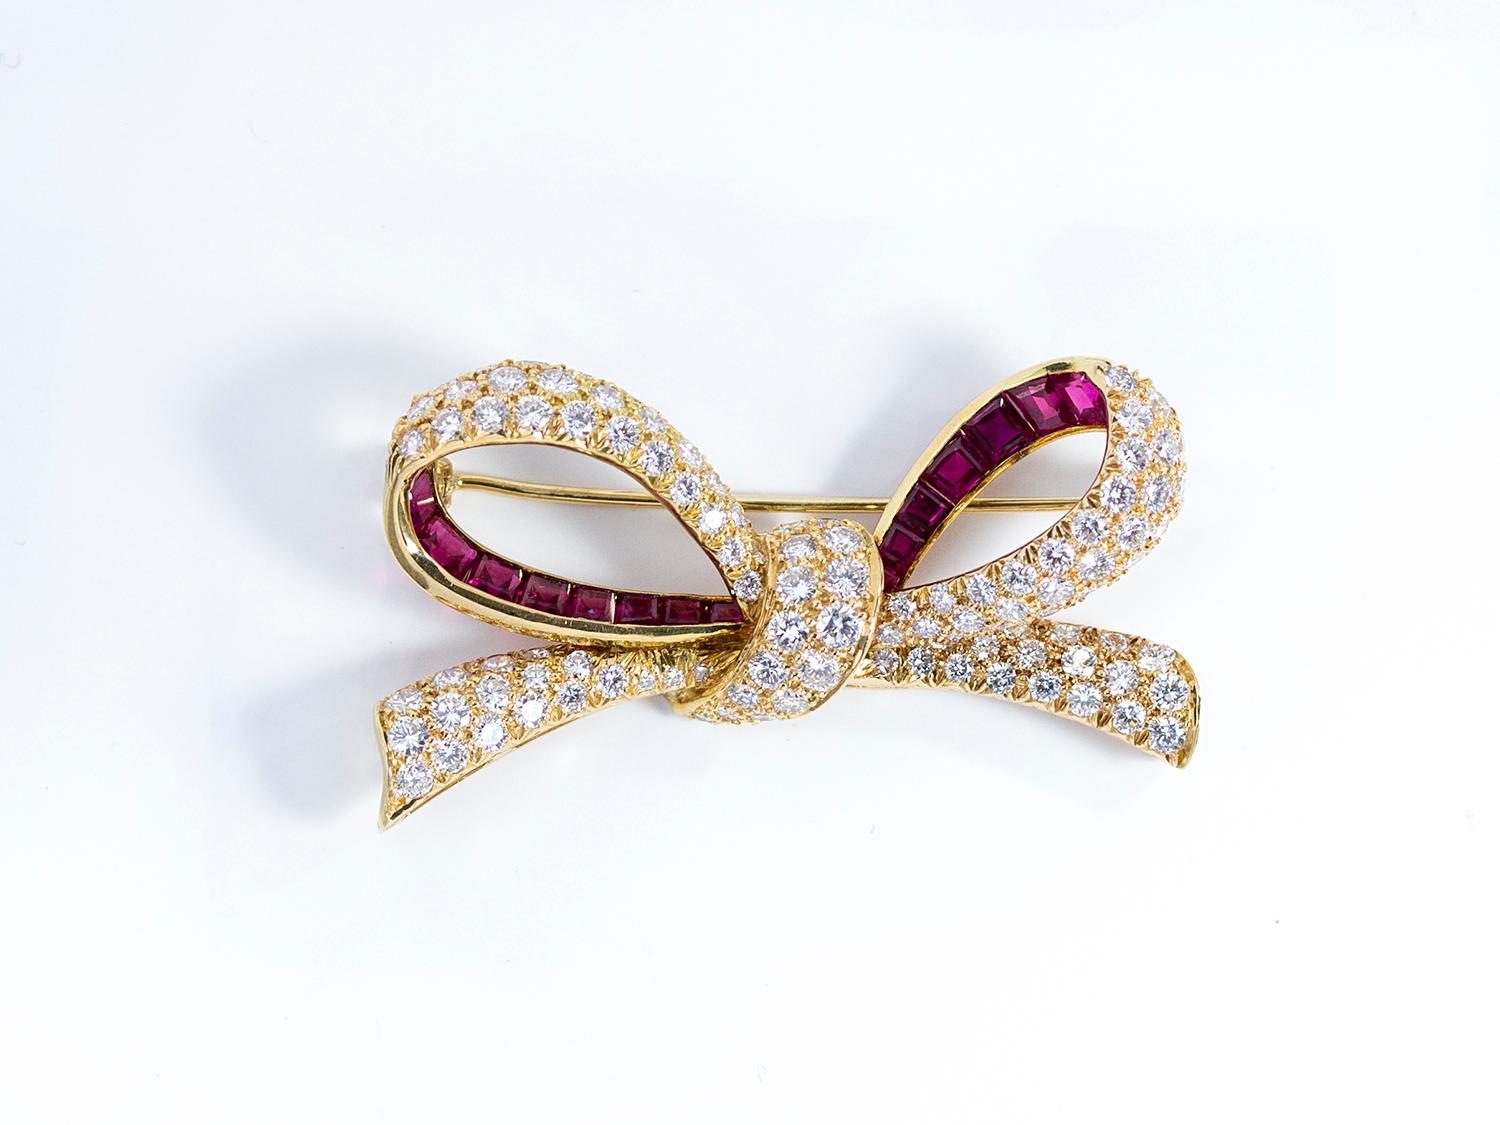 This Oscar Heyman 18kt yellow gold brooch contains 2.55cts of calibré rubies and 3.95cts round diamonds (F-G/VS+). The rubies are cut by hand in Oscar Heyman's Madison Avenue workshop by the lapidary. The diamonds are bead set. It is stamped with